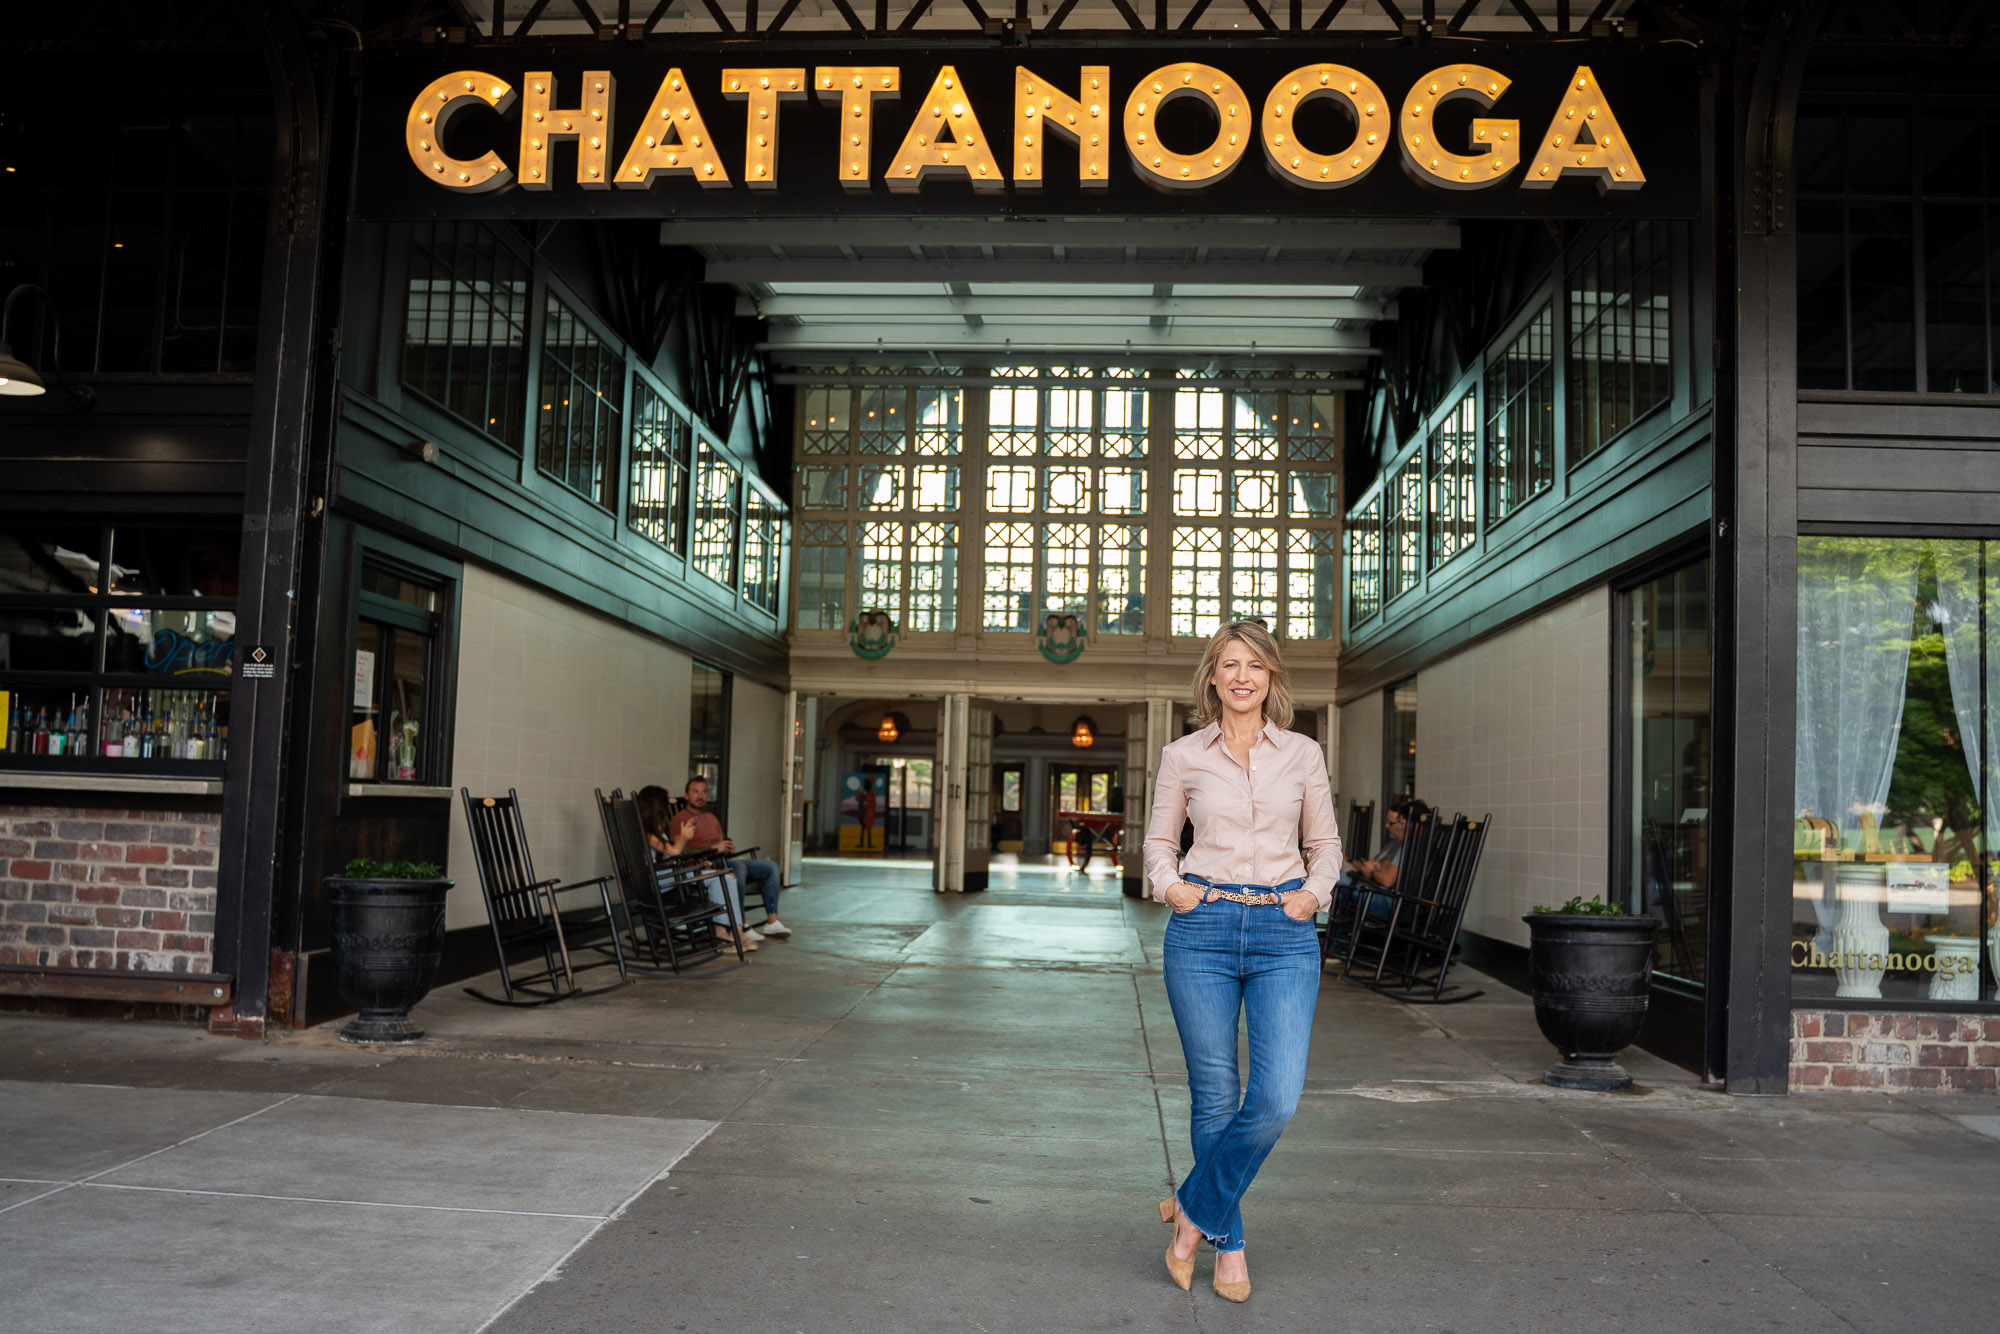 Tennessee Chattanooga Wrestling